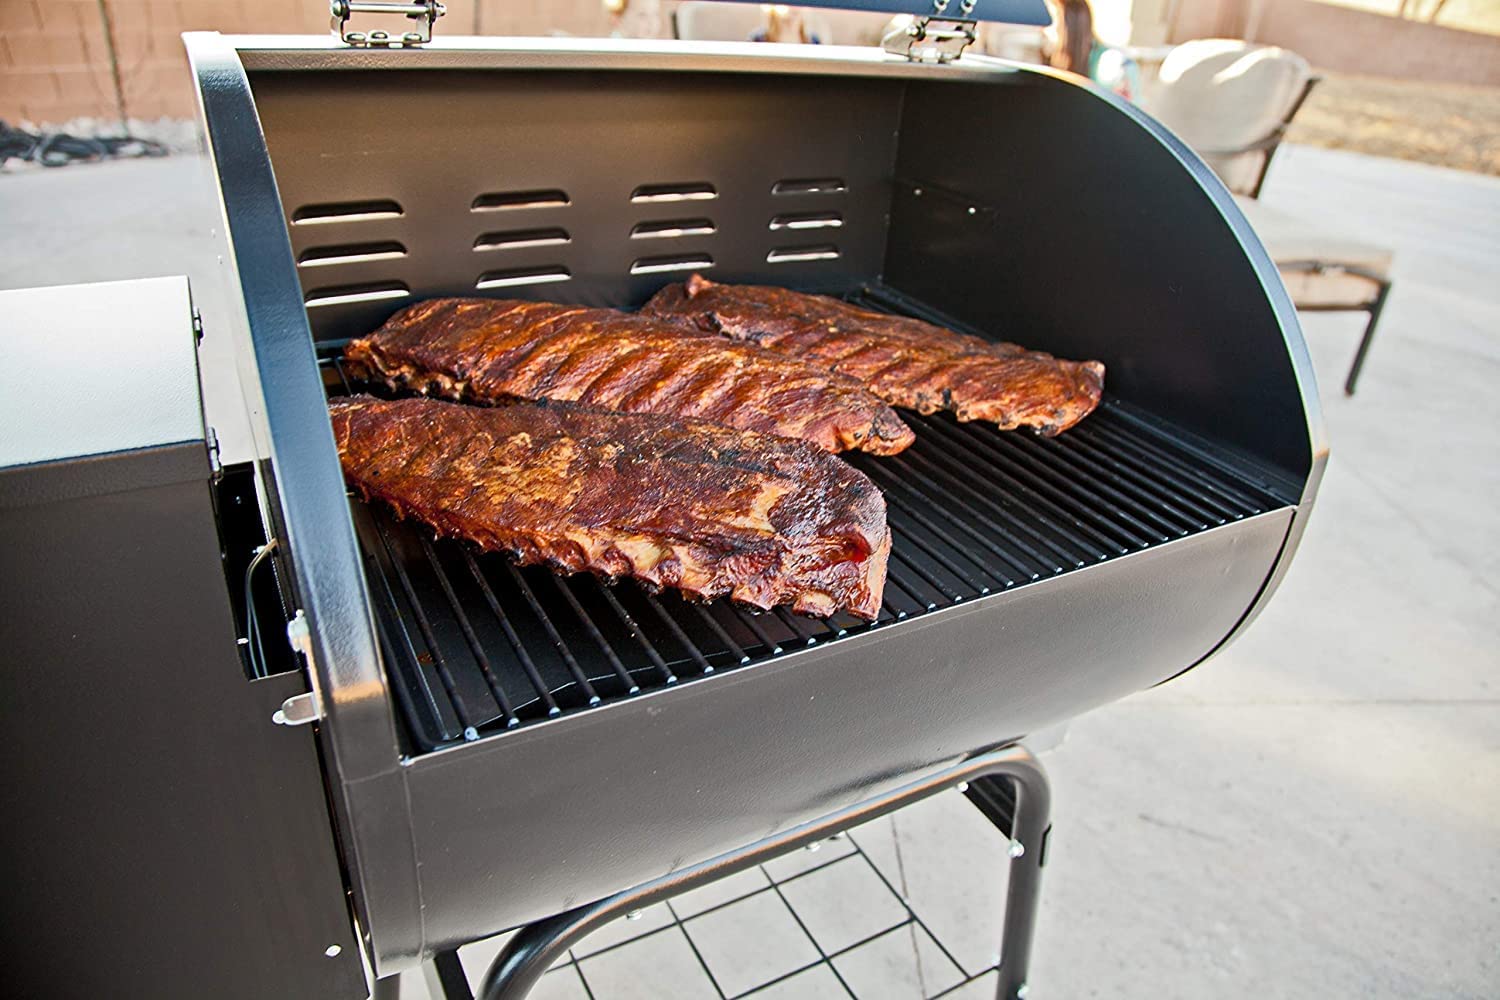 Camp Chef SmokePro SE Pellet Grill - image 8 of 8